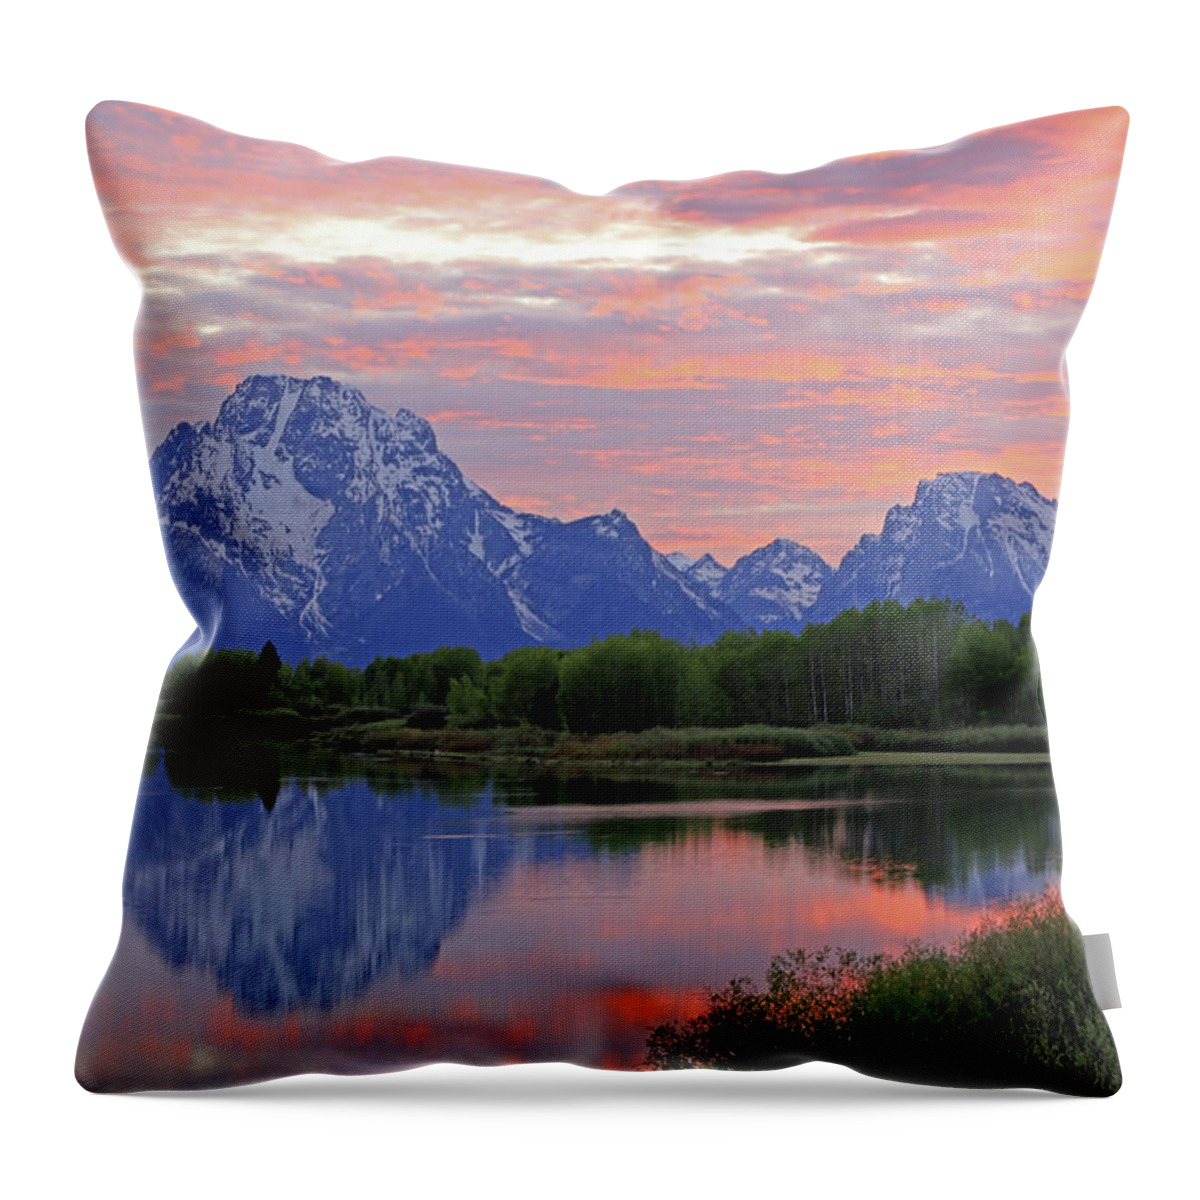 Oxbow Bend Throw Pillow featuring the photograph Grand Teton National Park - Oxbow Bend Snake River by Richard Krebs